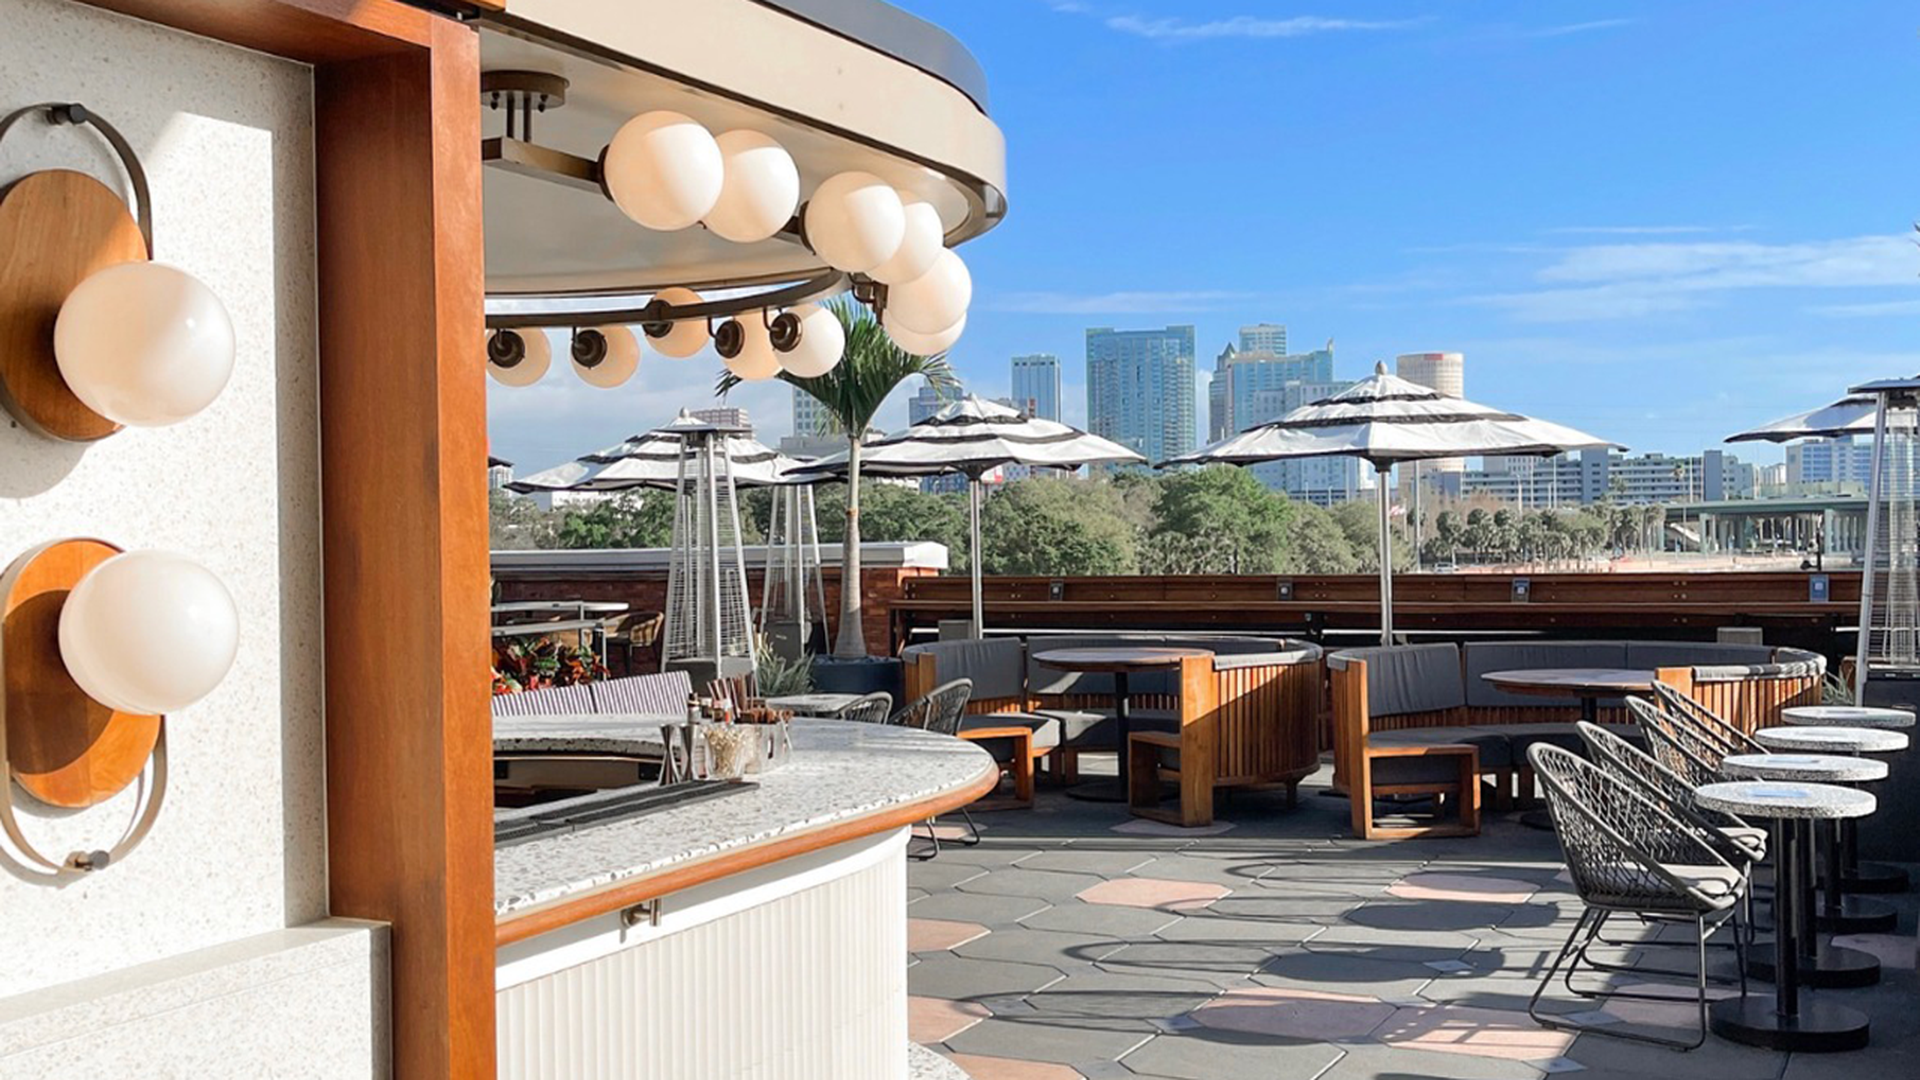 Rooftop bar with wood paneling in front of skyline